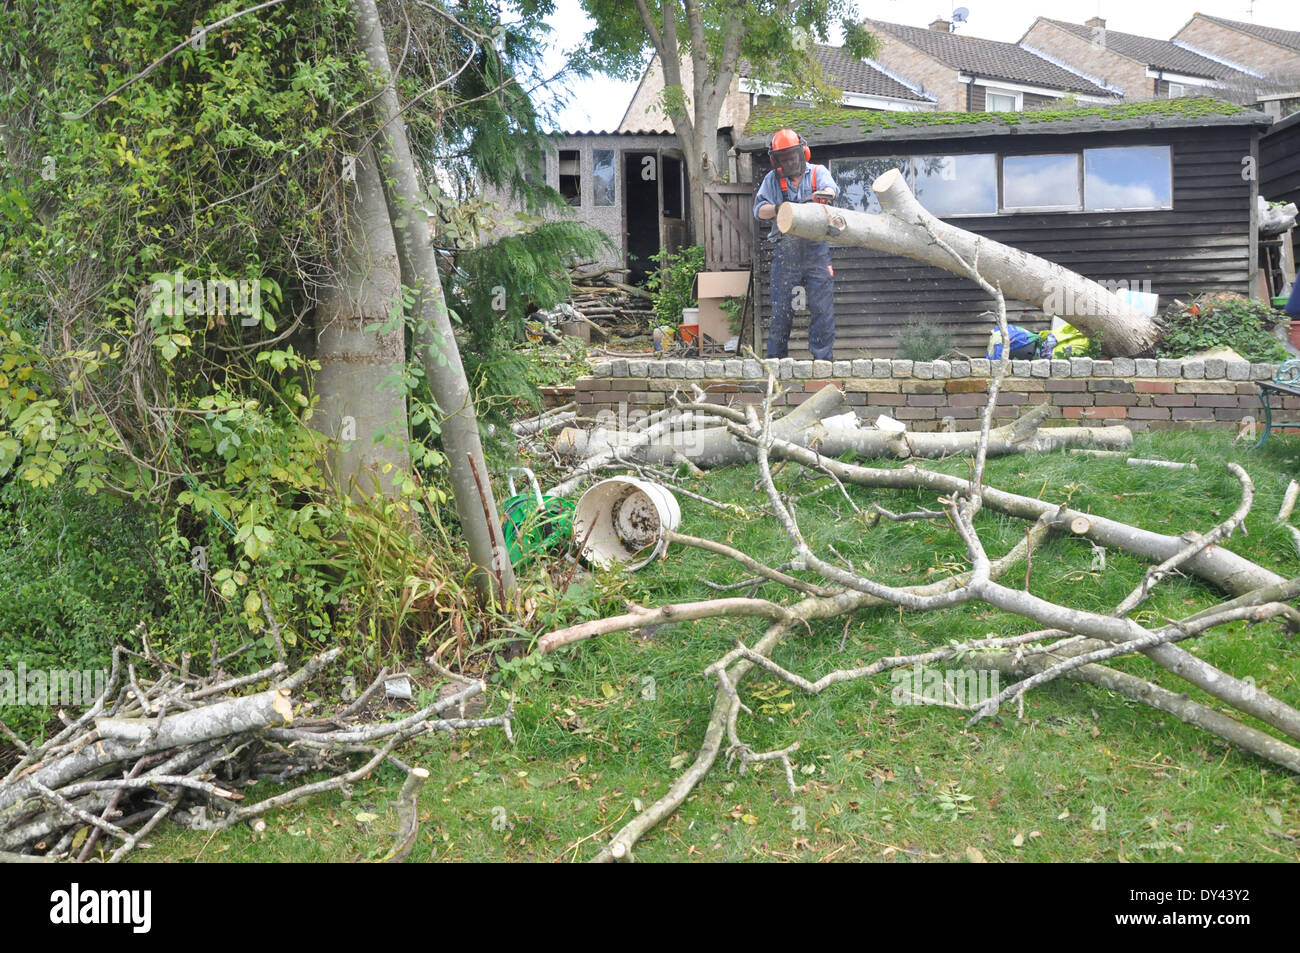 Man uses chainsaw in garden on fallen tree Stock Photo